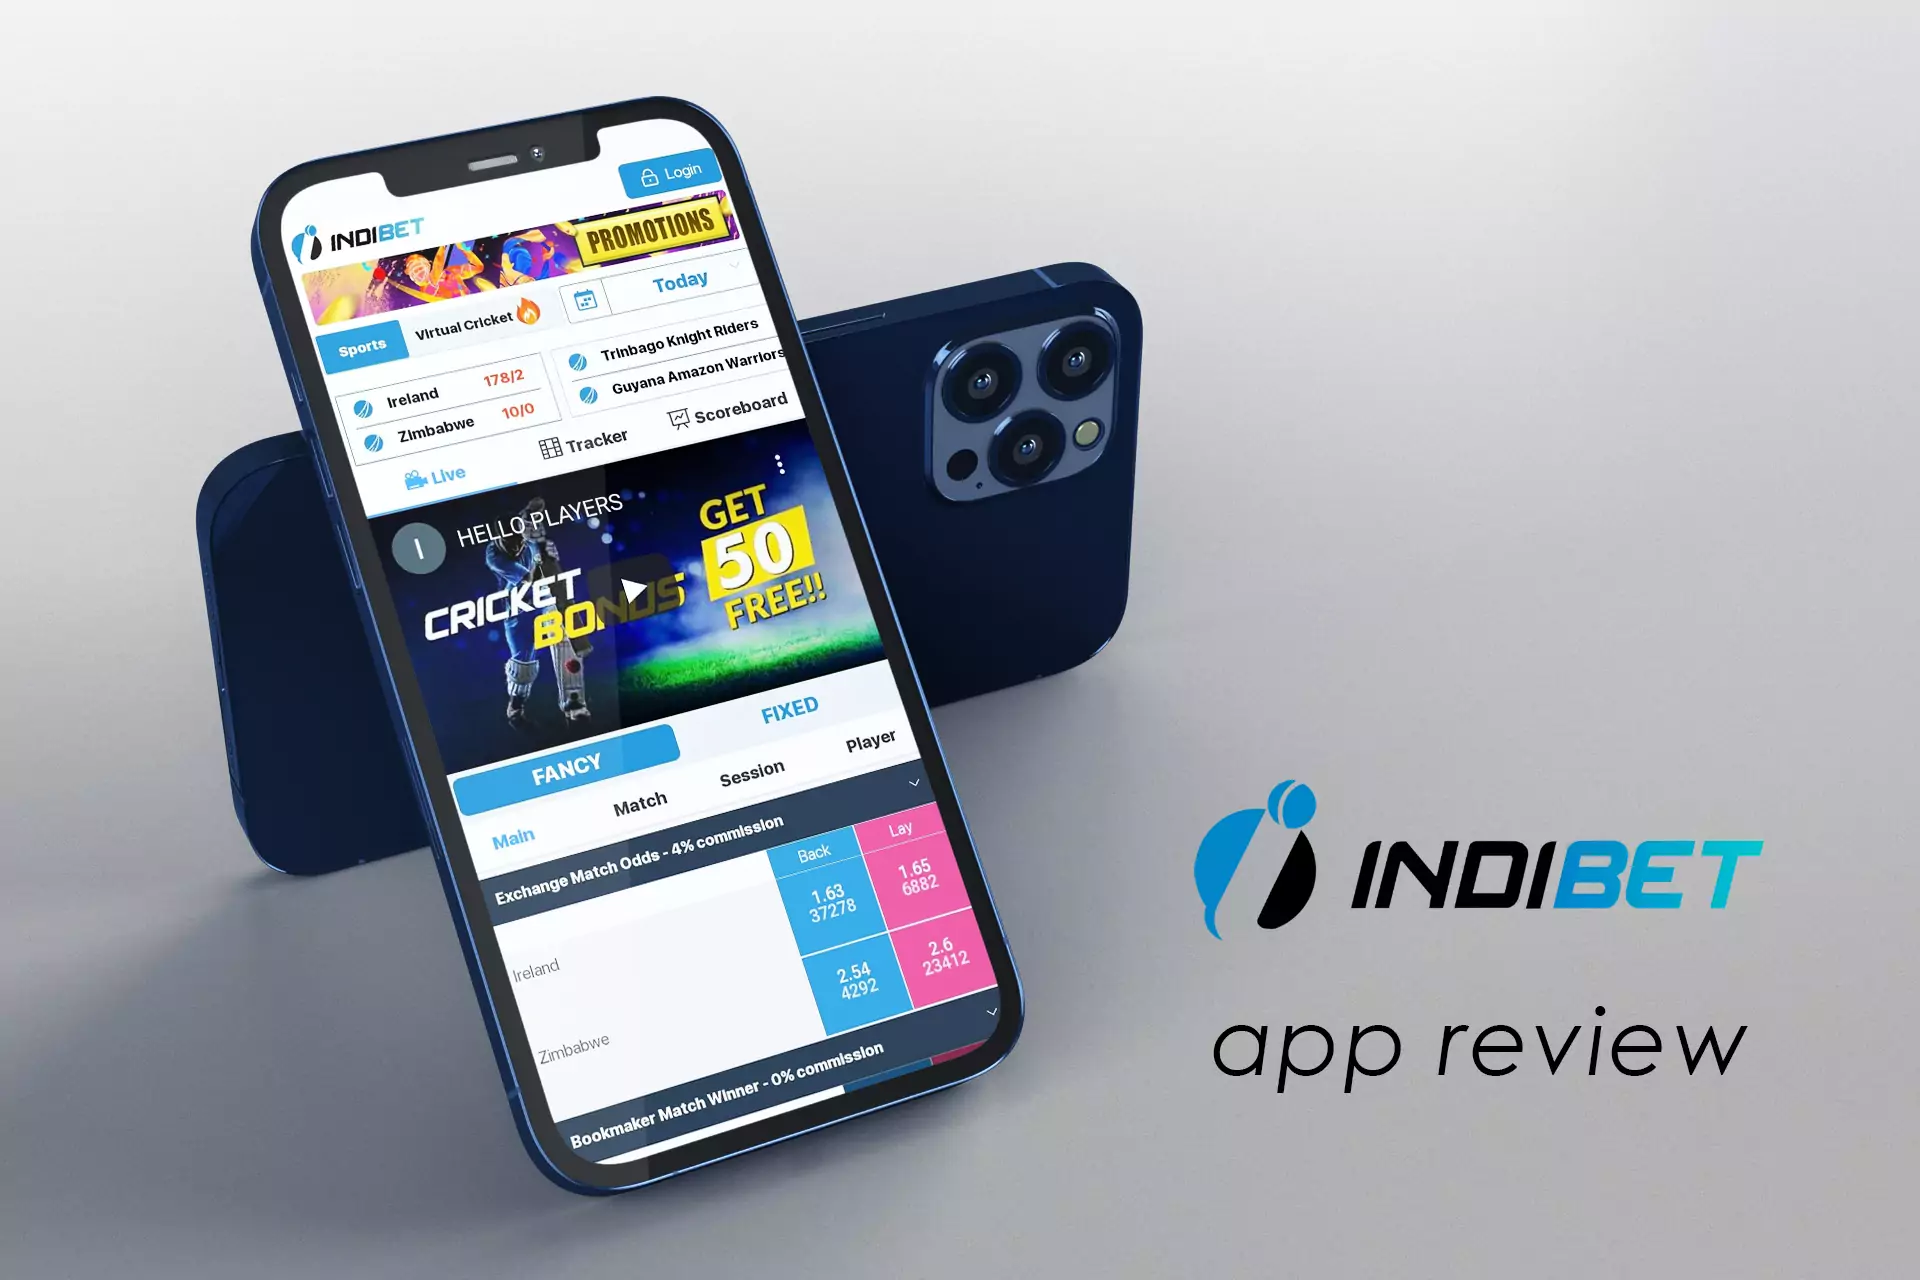 The Indibet app was presented to users in 2020.